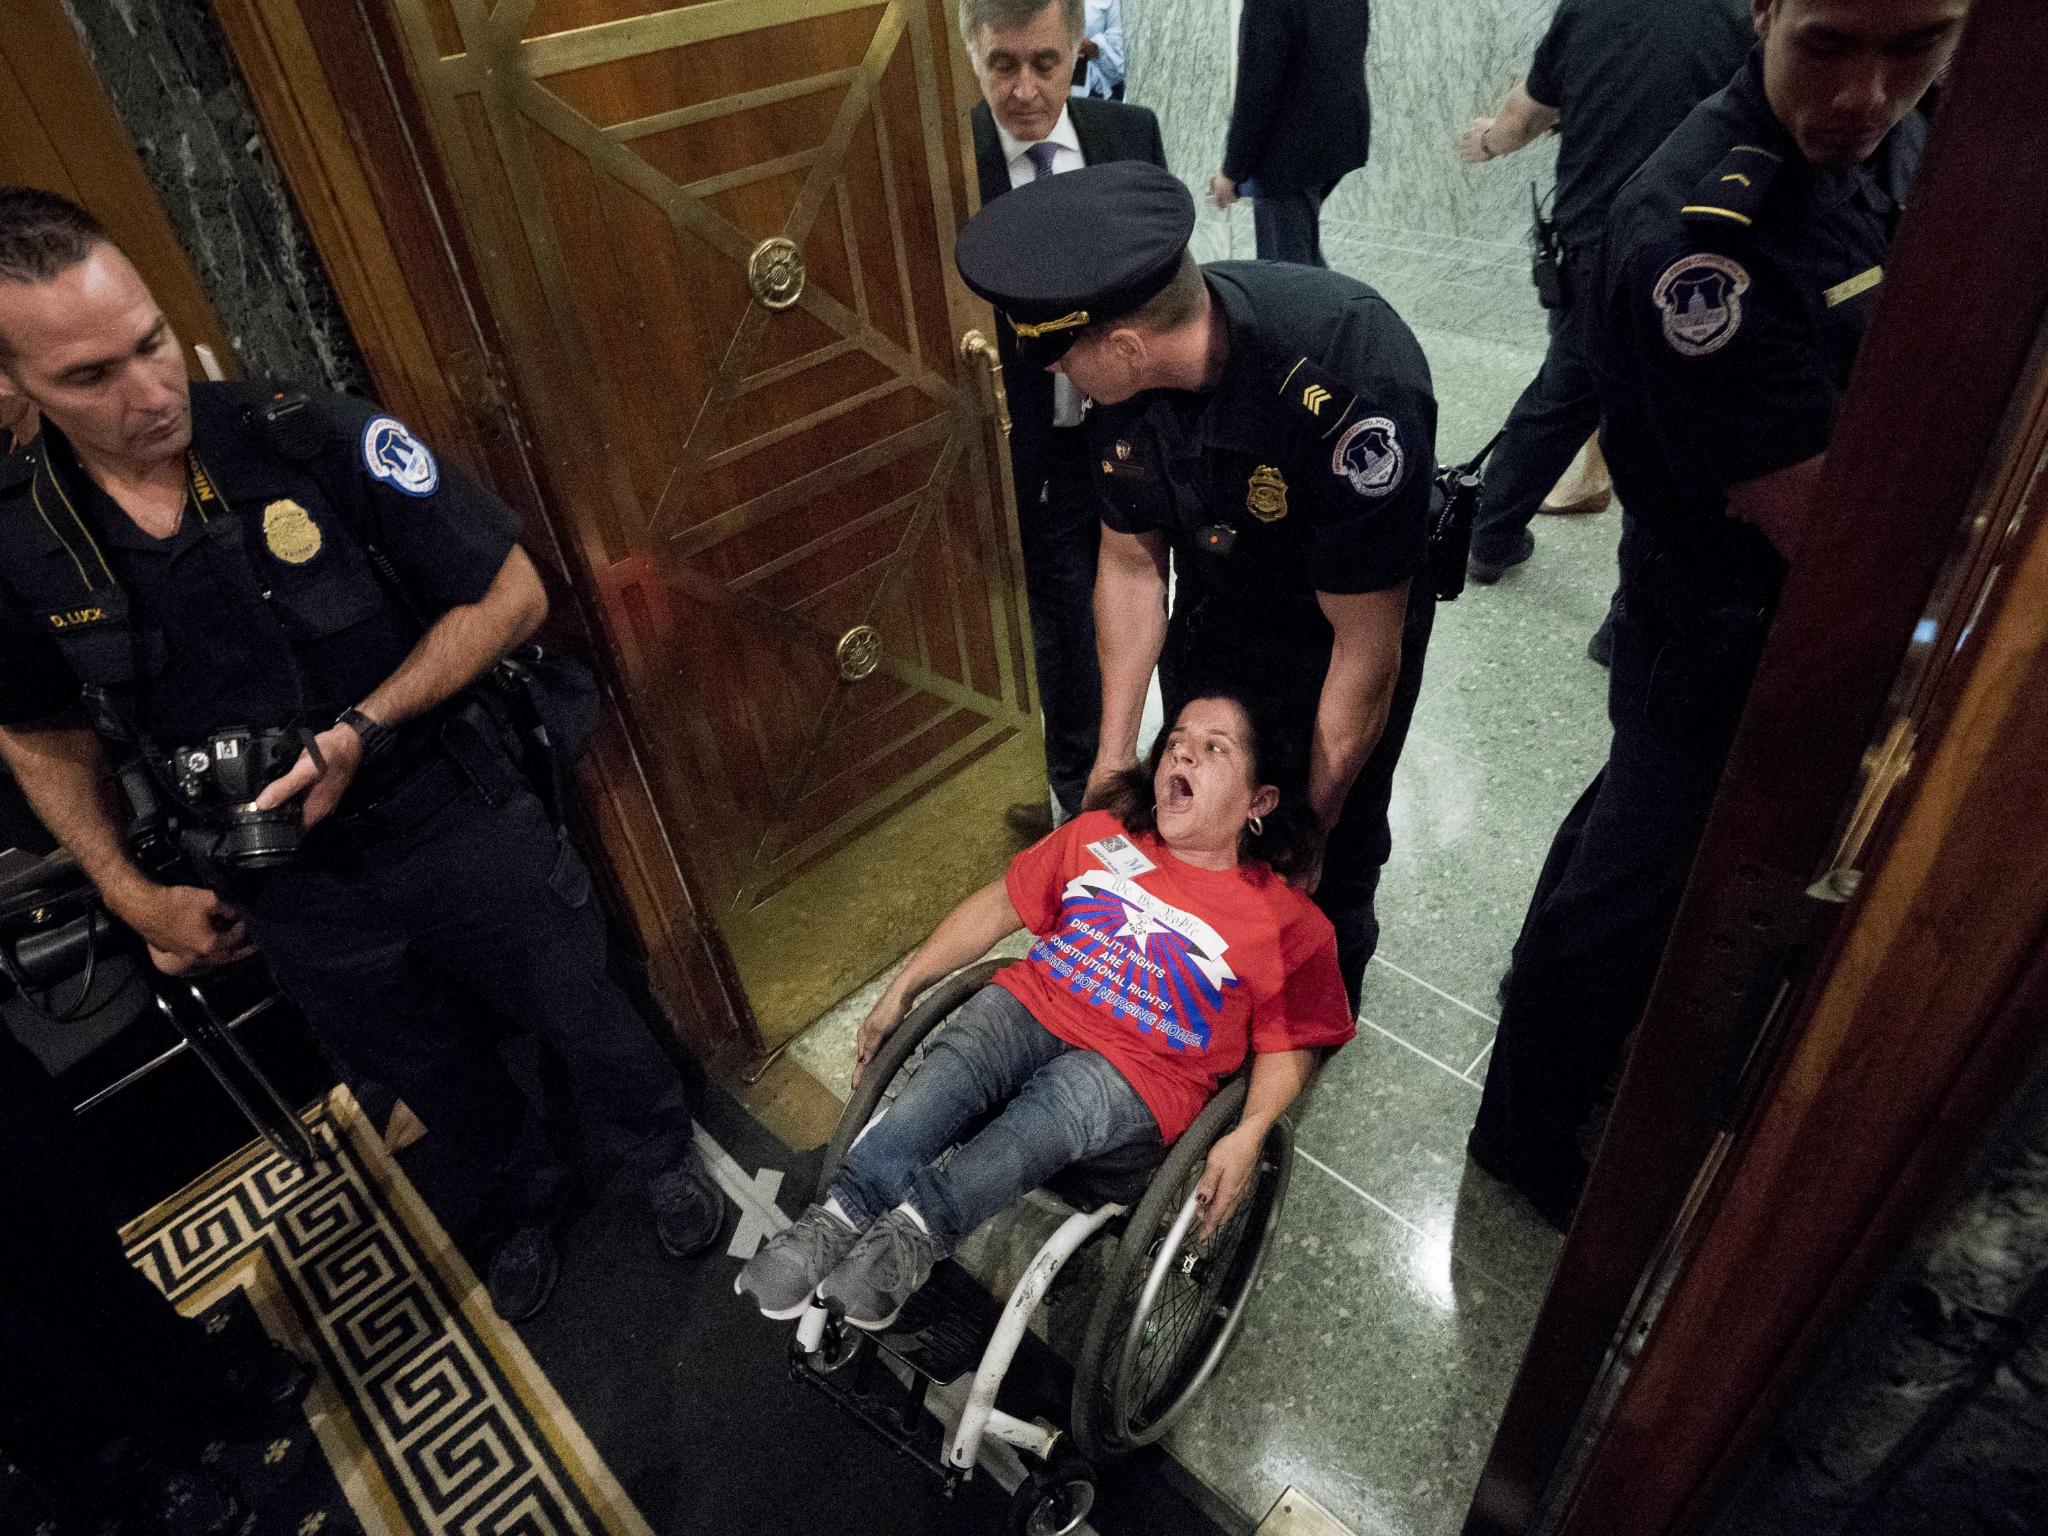 A woman in a wheelchair is removed after disrupting a Senate Finance Committee hearing to consider the Graham-Cassidy healthcare proposal on Capitol Hill on 25 September